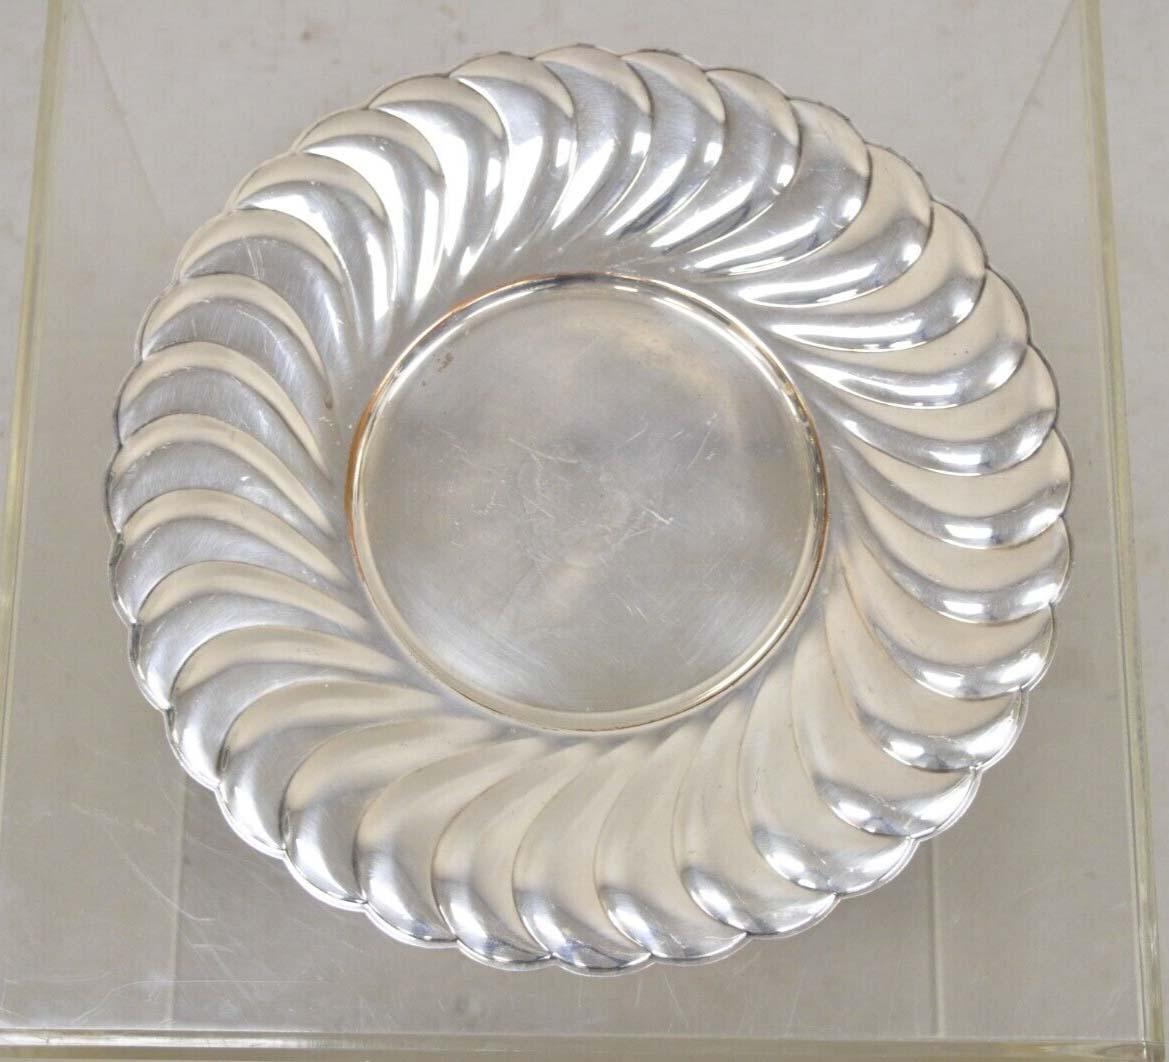 WM Rogers Waverly 3826 Scalloped Edge Round Silver Plated Serving Platter Tray. Circa Late 20th Century. Measurements: 1